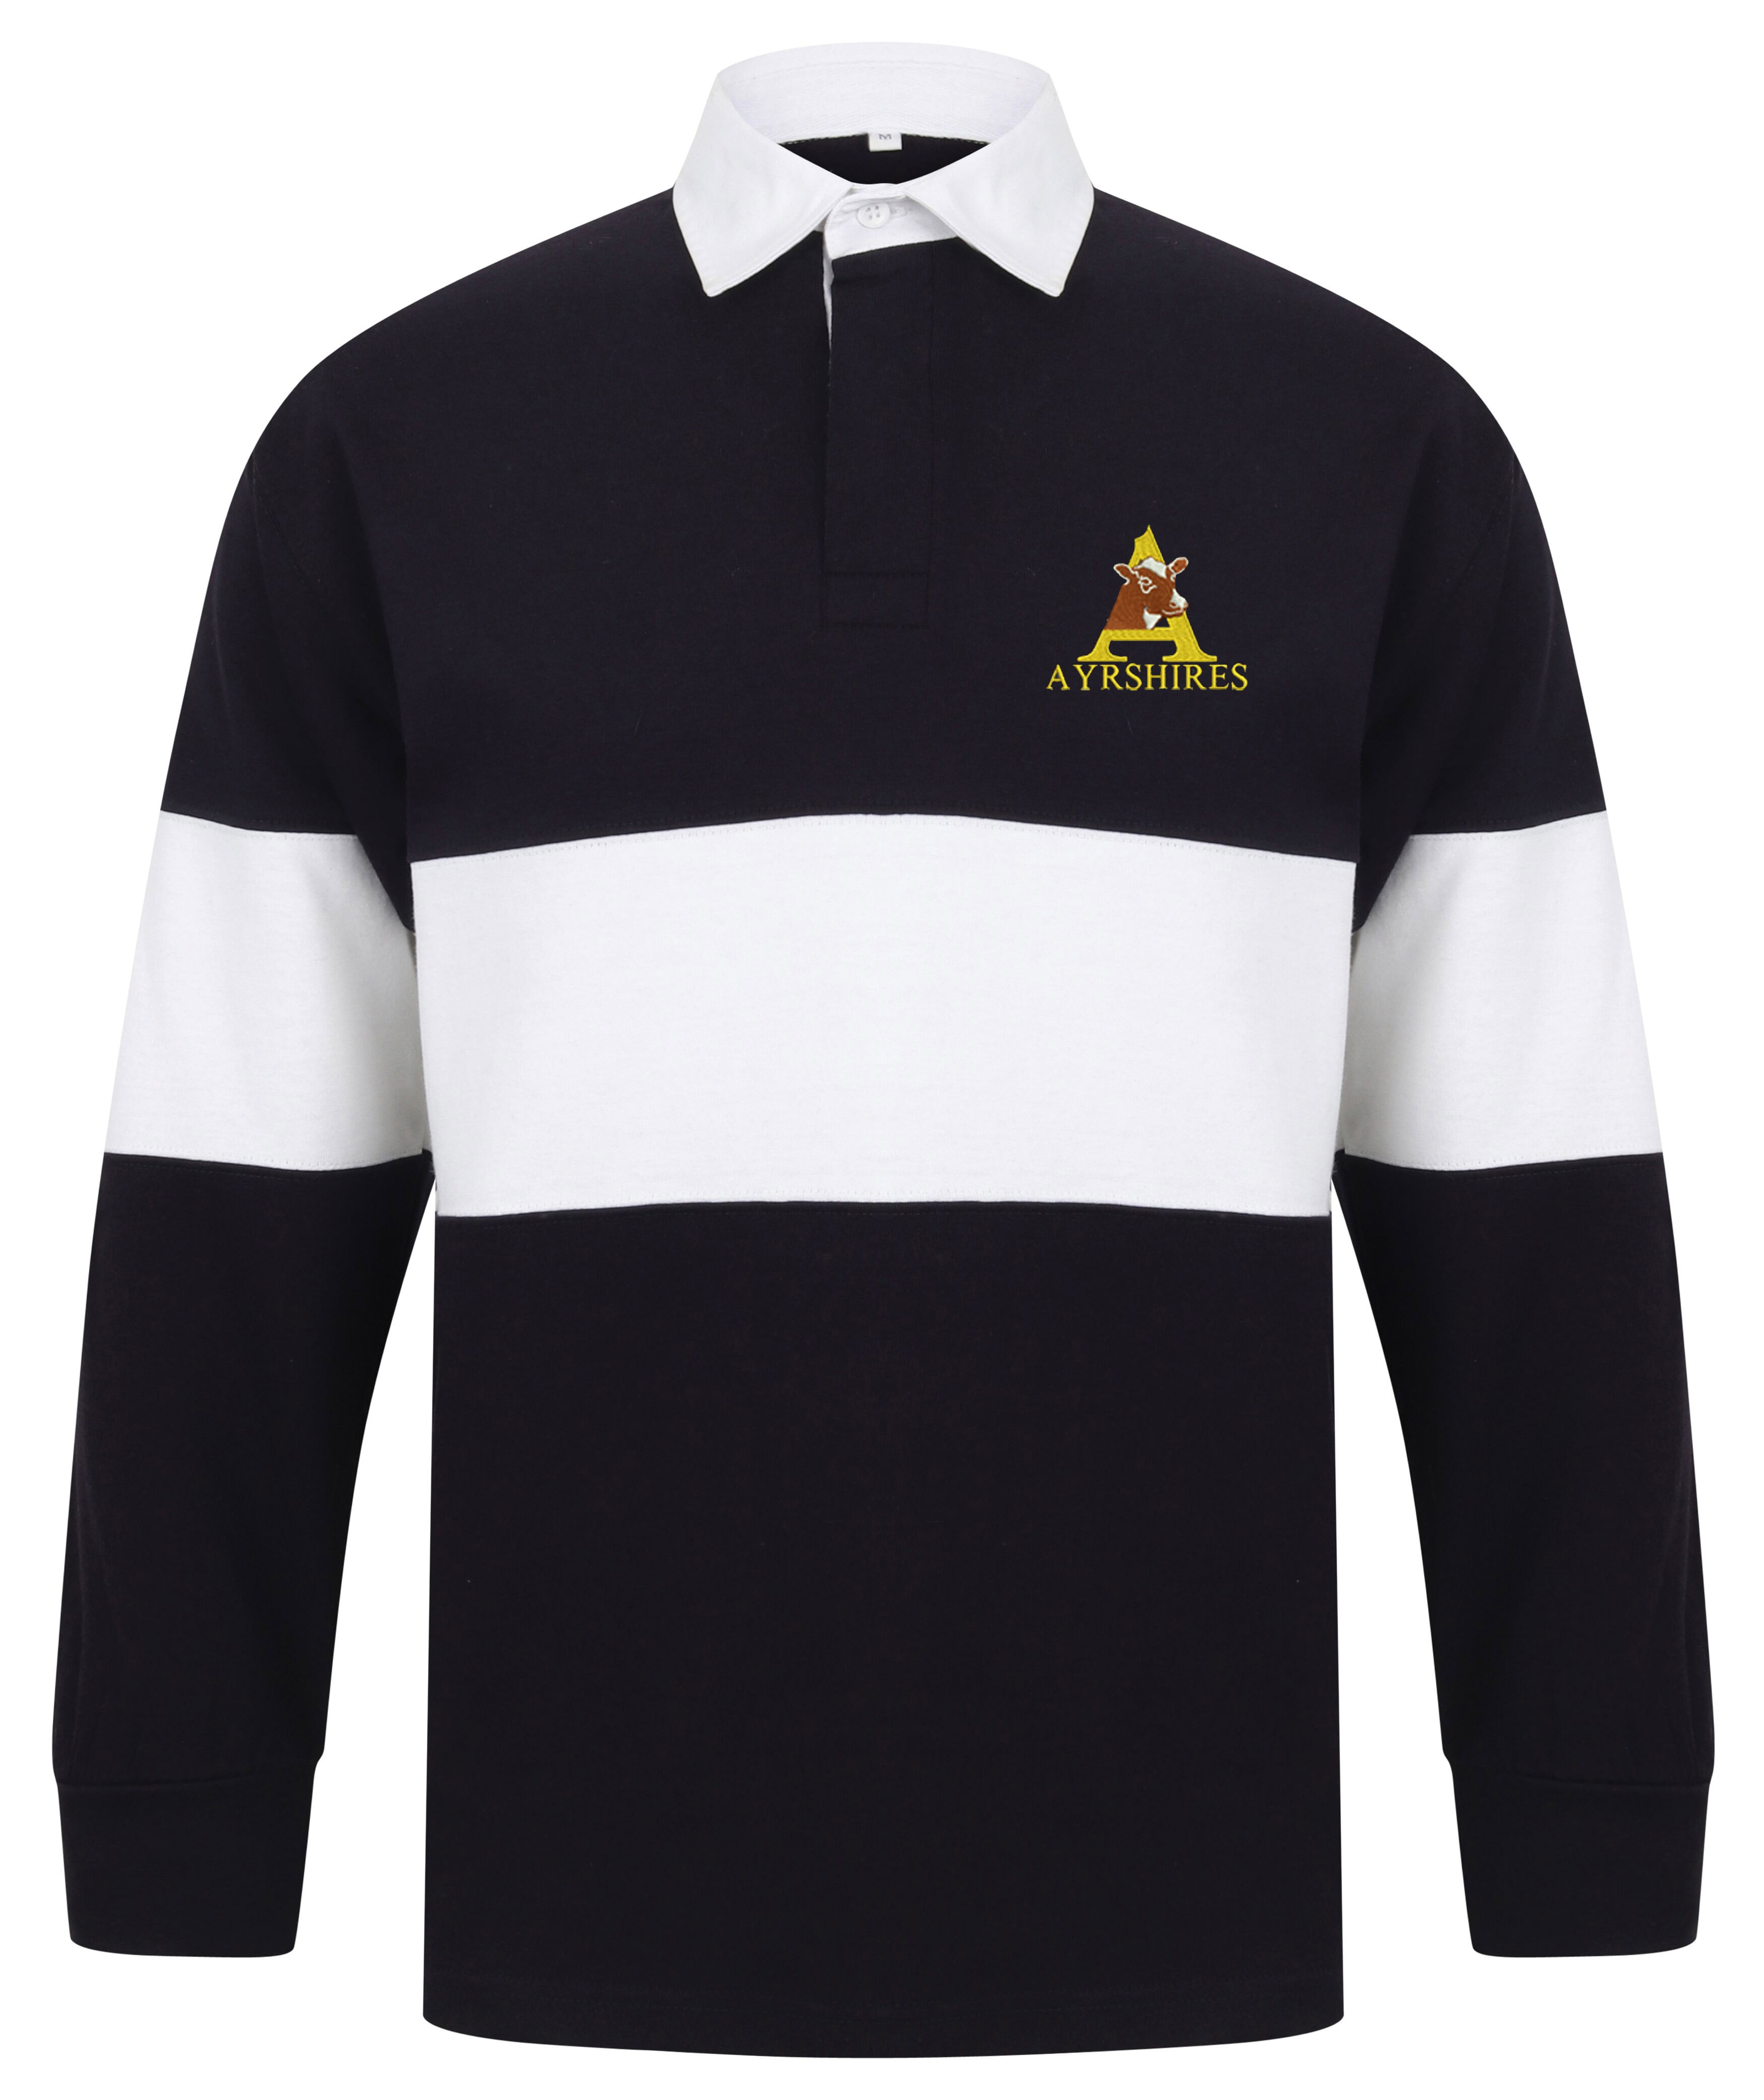 Ayrshire Cattle Society Front Row & Co Panelled rugby shirt